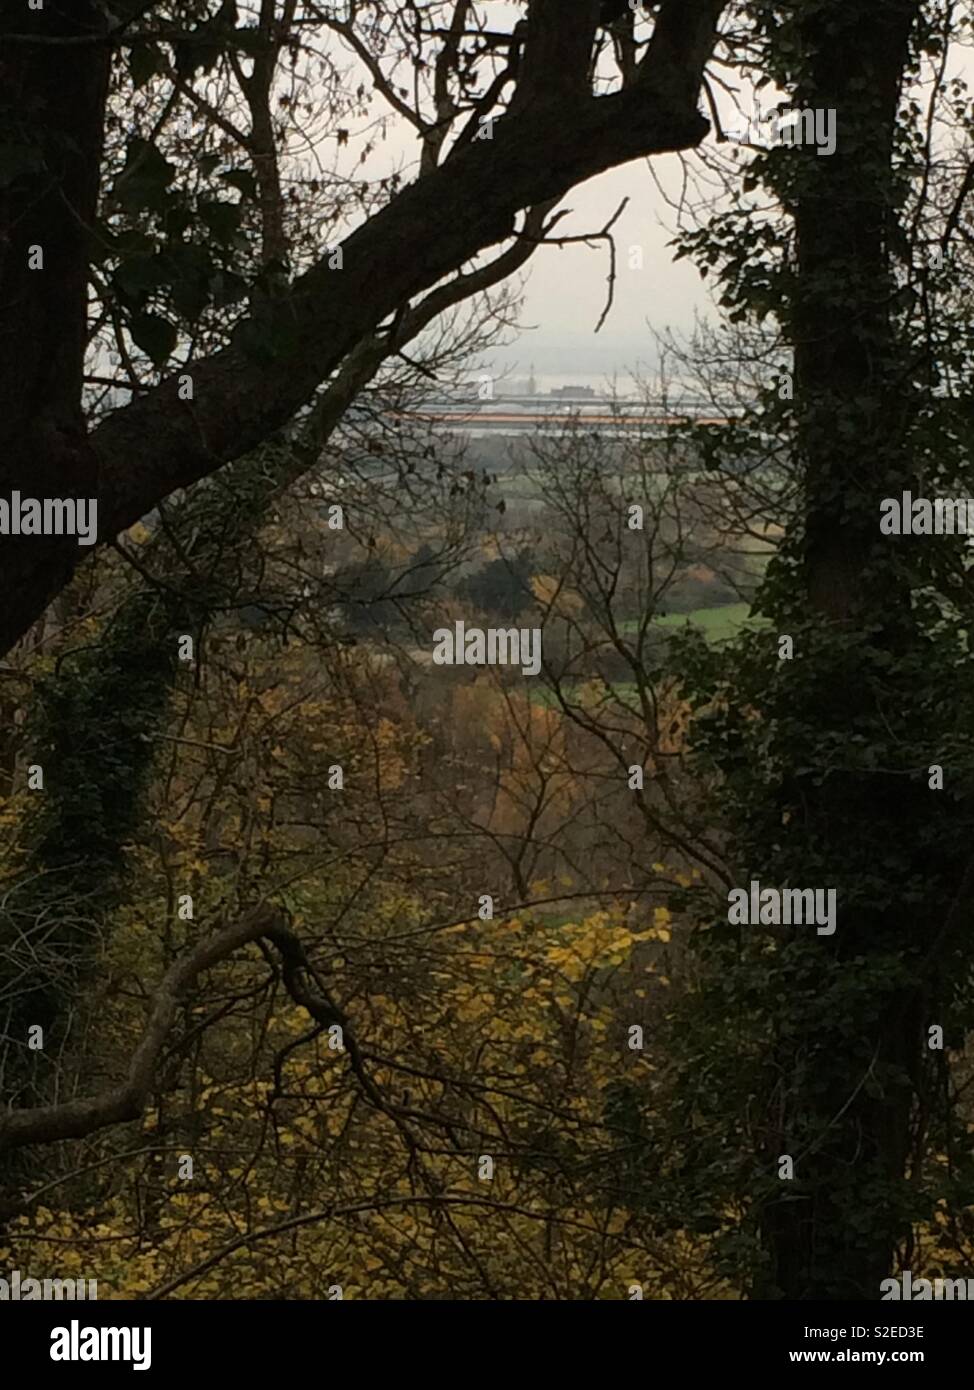 Looking through trees at buildings in the far distance Stock Photo